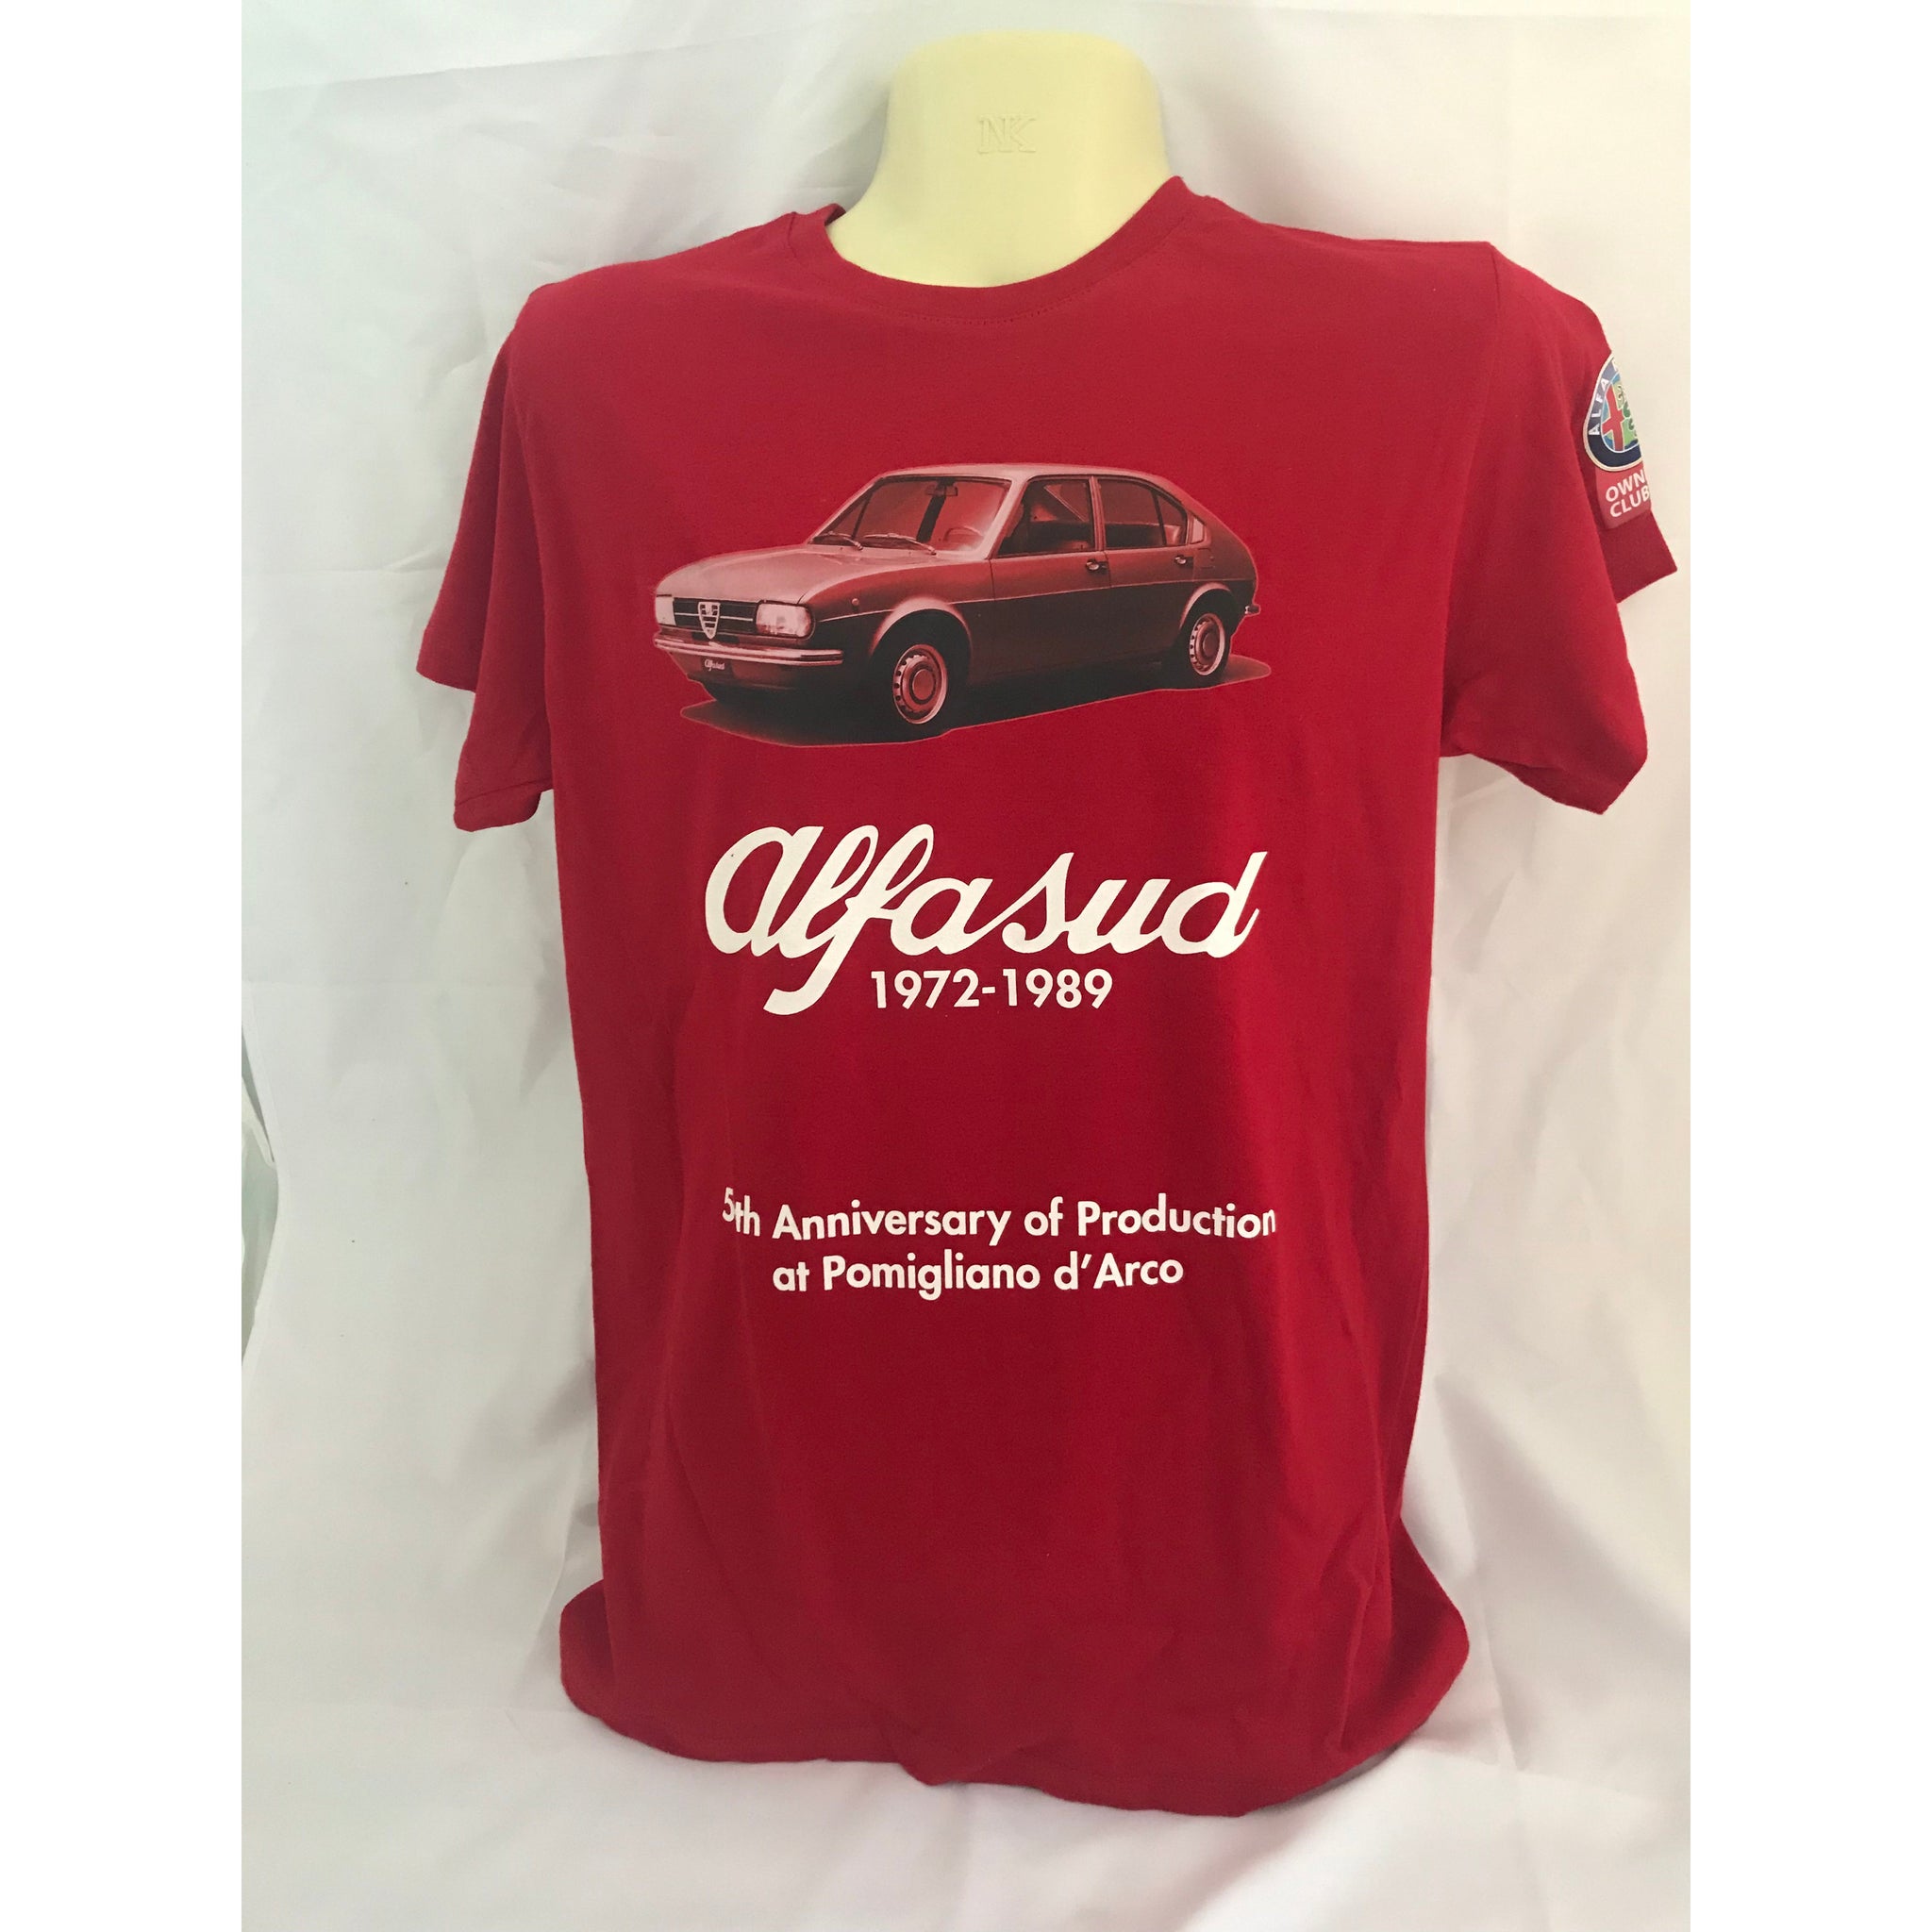 AROC Alfasud T-Shirt - Red - Small, Medium & Large ONLY